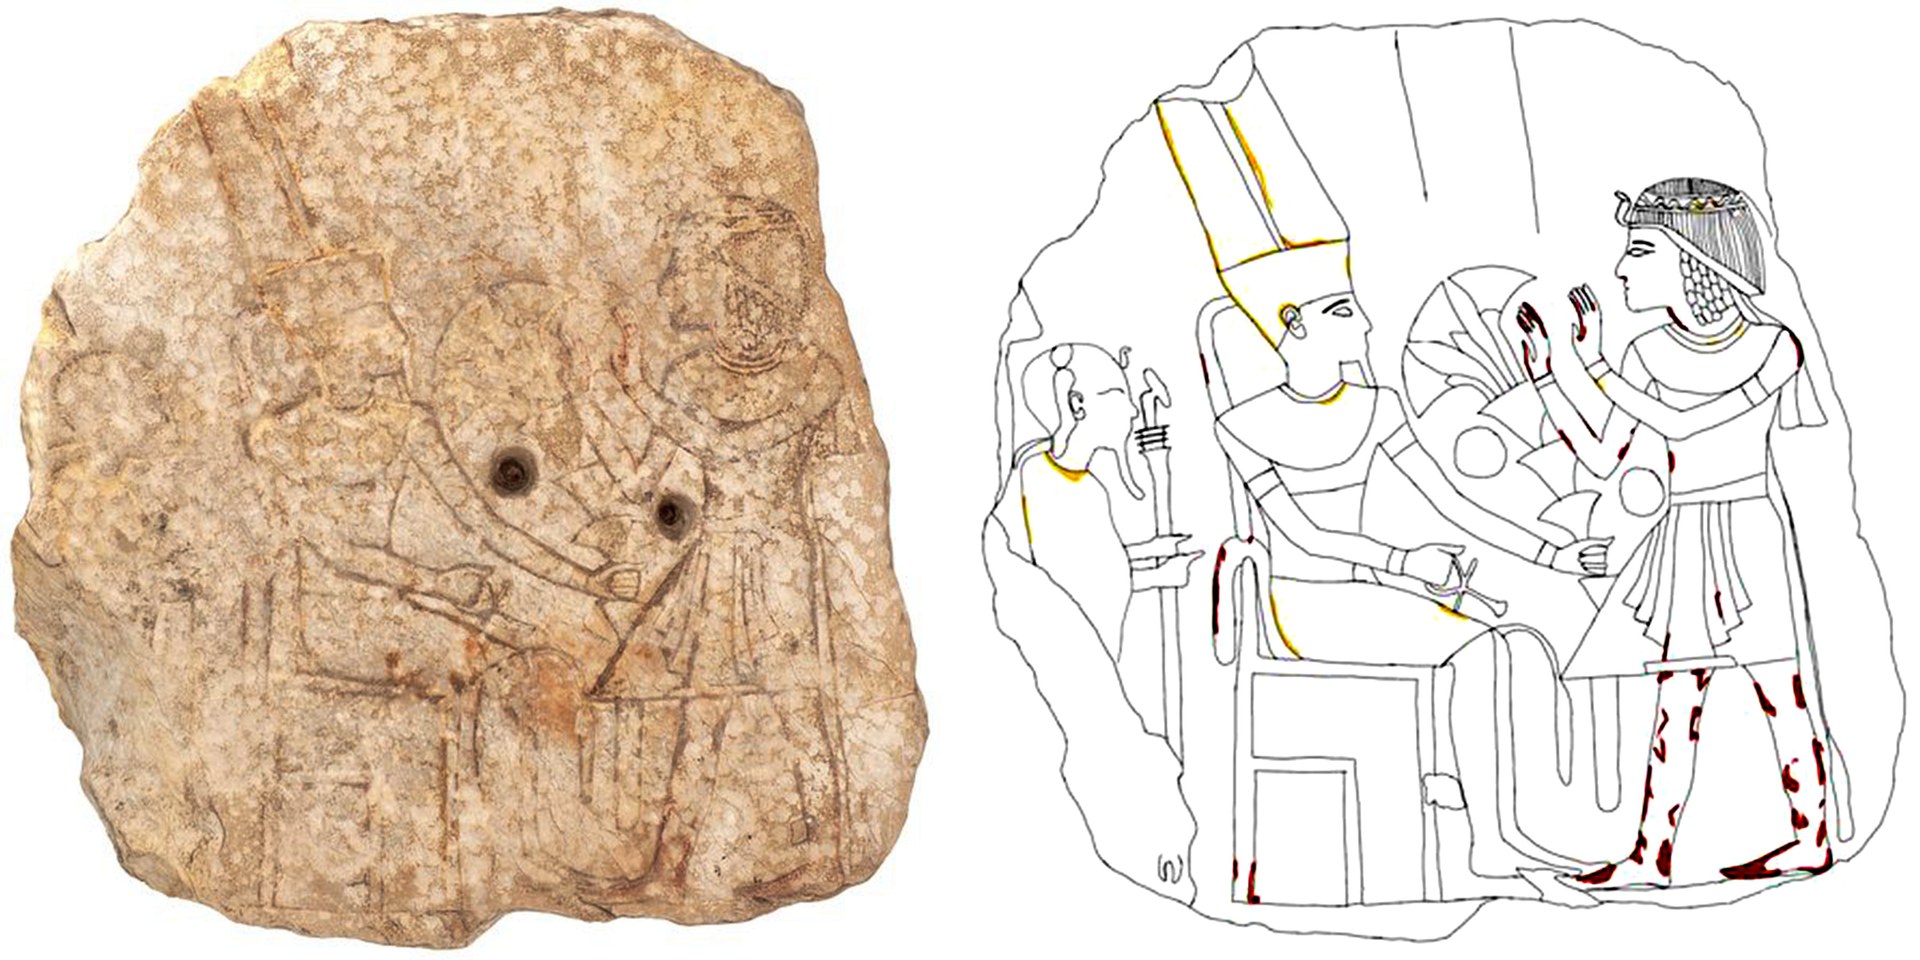 Image of the front of the stele (left) with sketch (right),